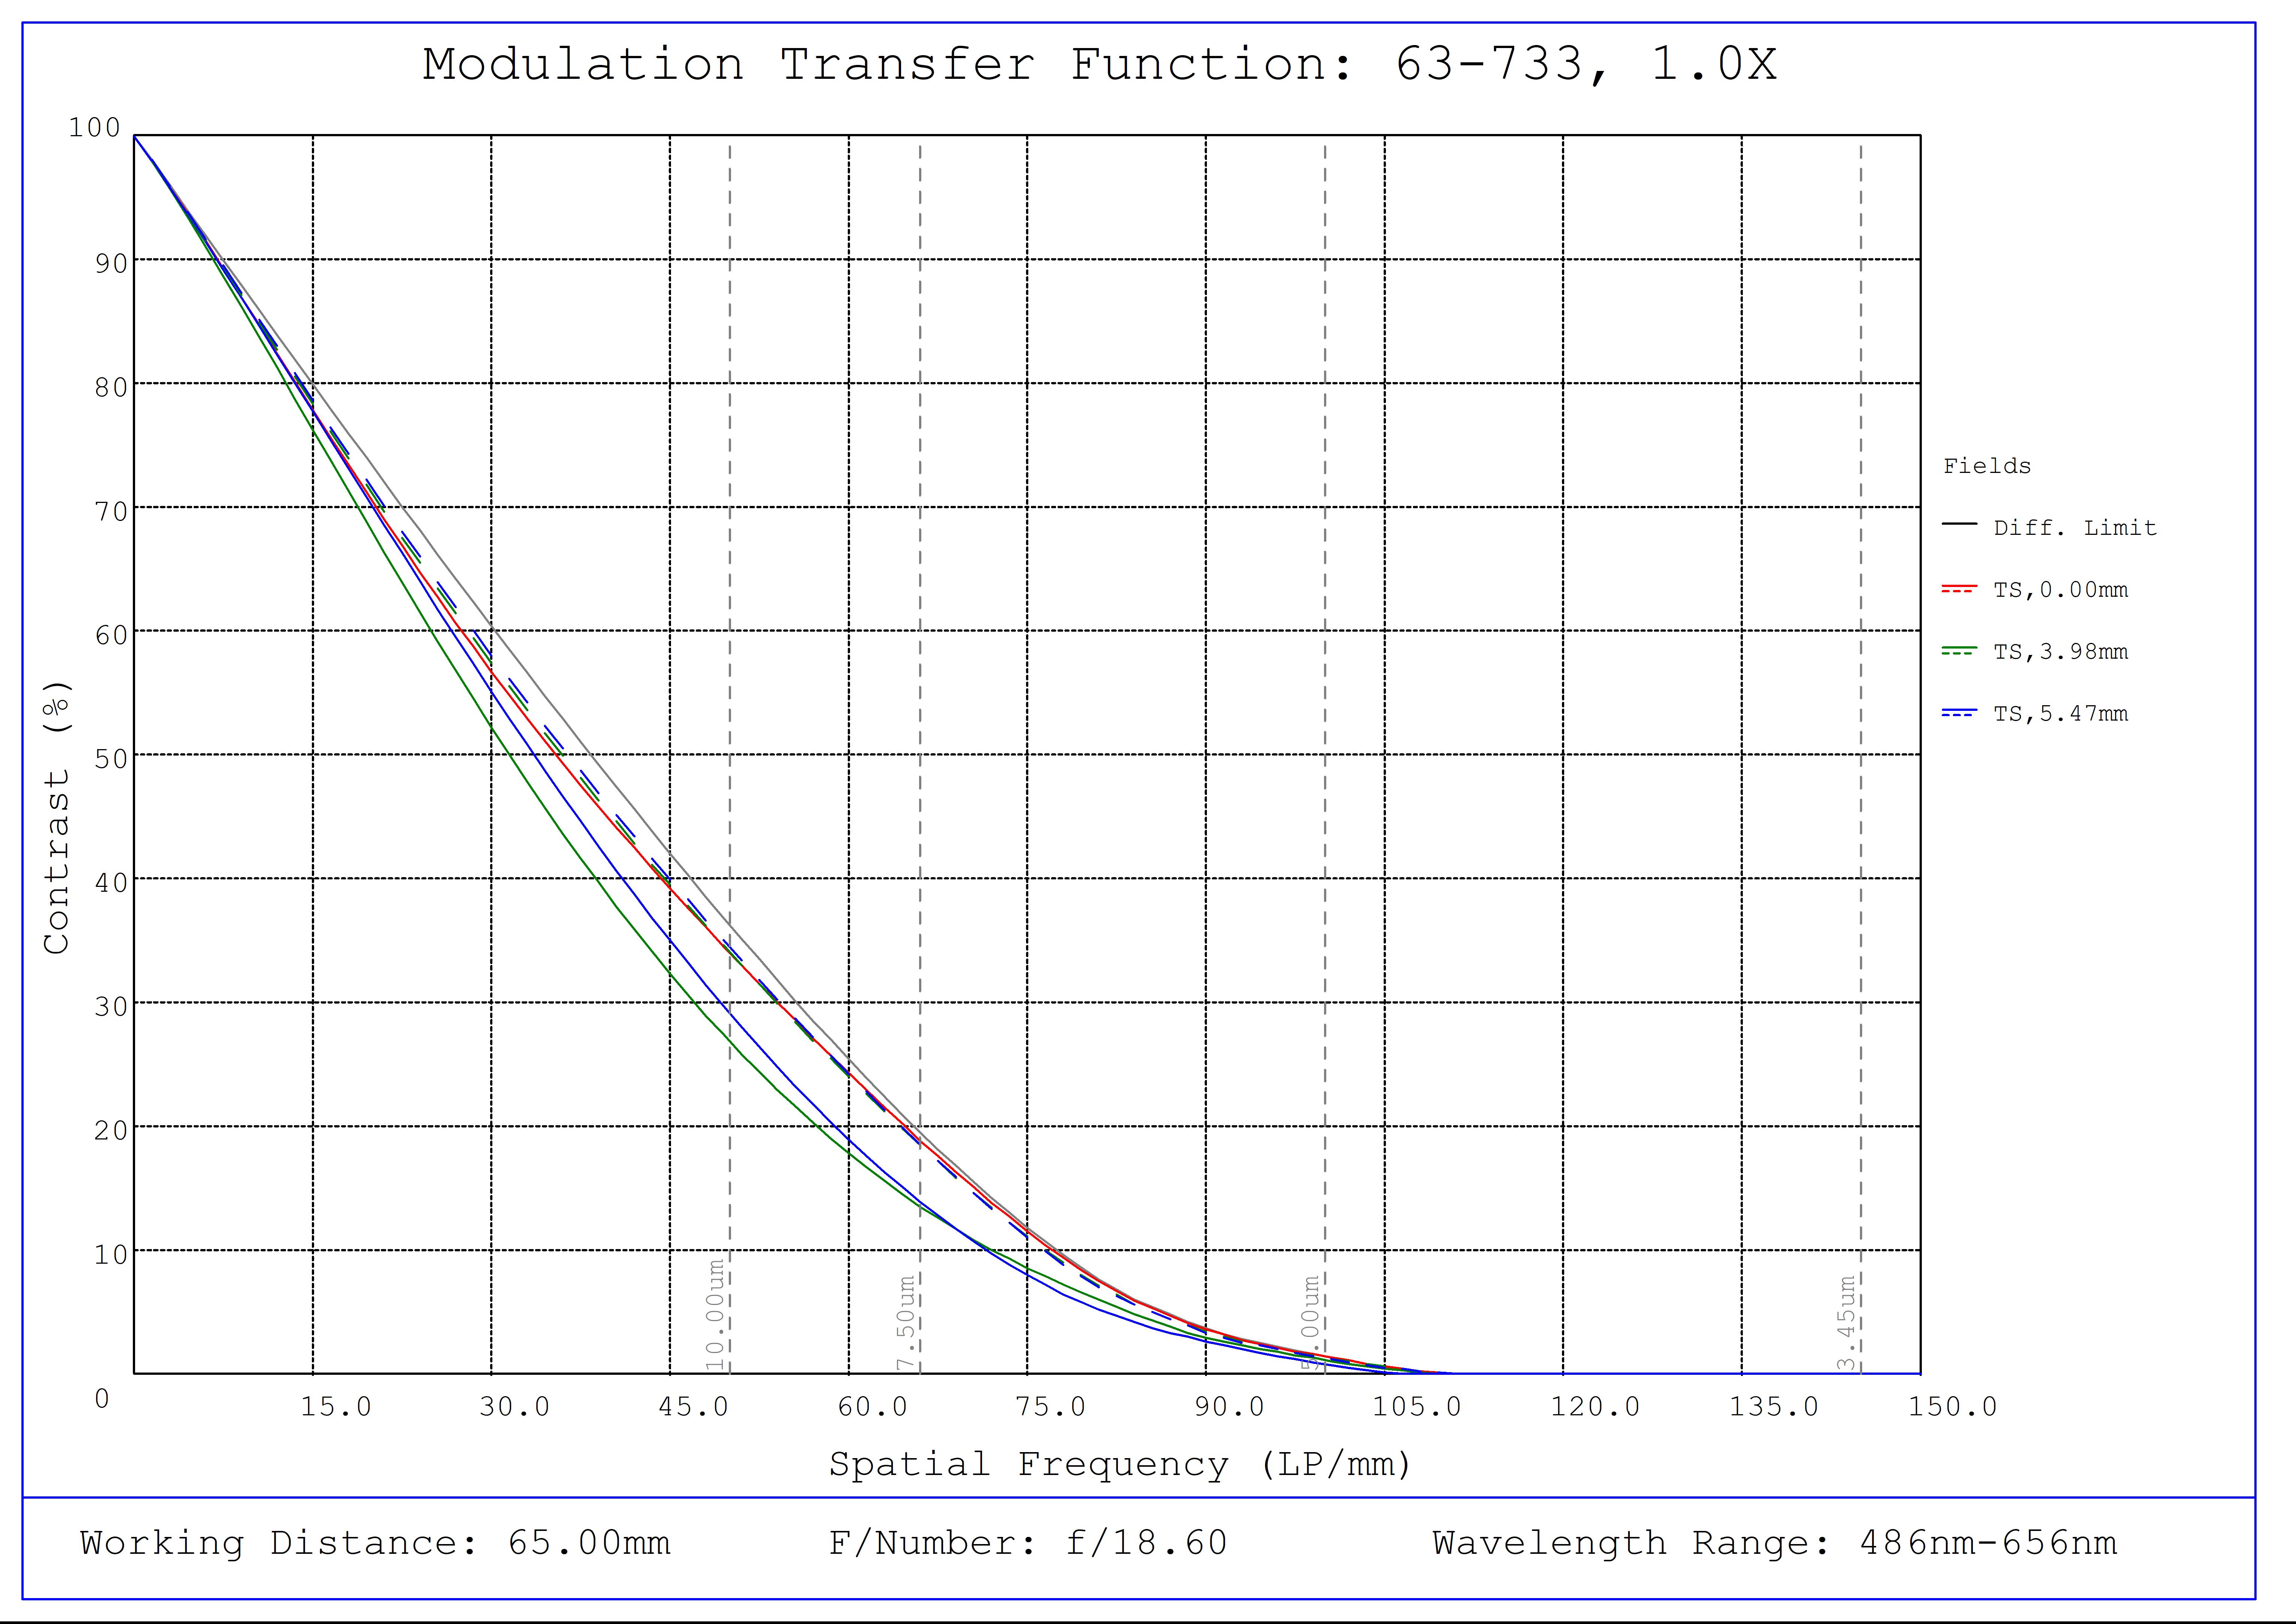 #63-733, 1X, 65mm WD CompactTL™ Telecentric Lens, Modulated Transfer Function (MTF) Plot, 65mm Working Distance, f18.6